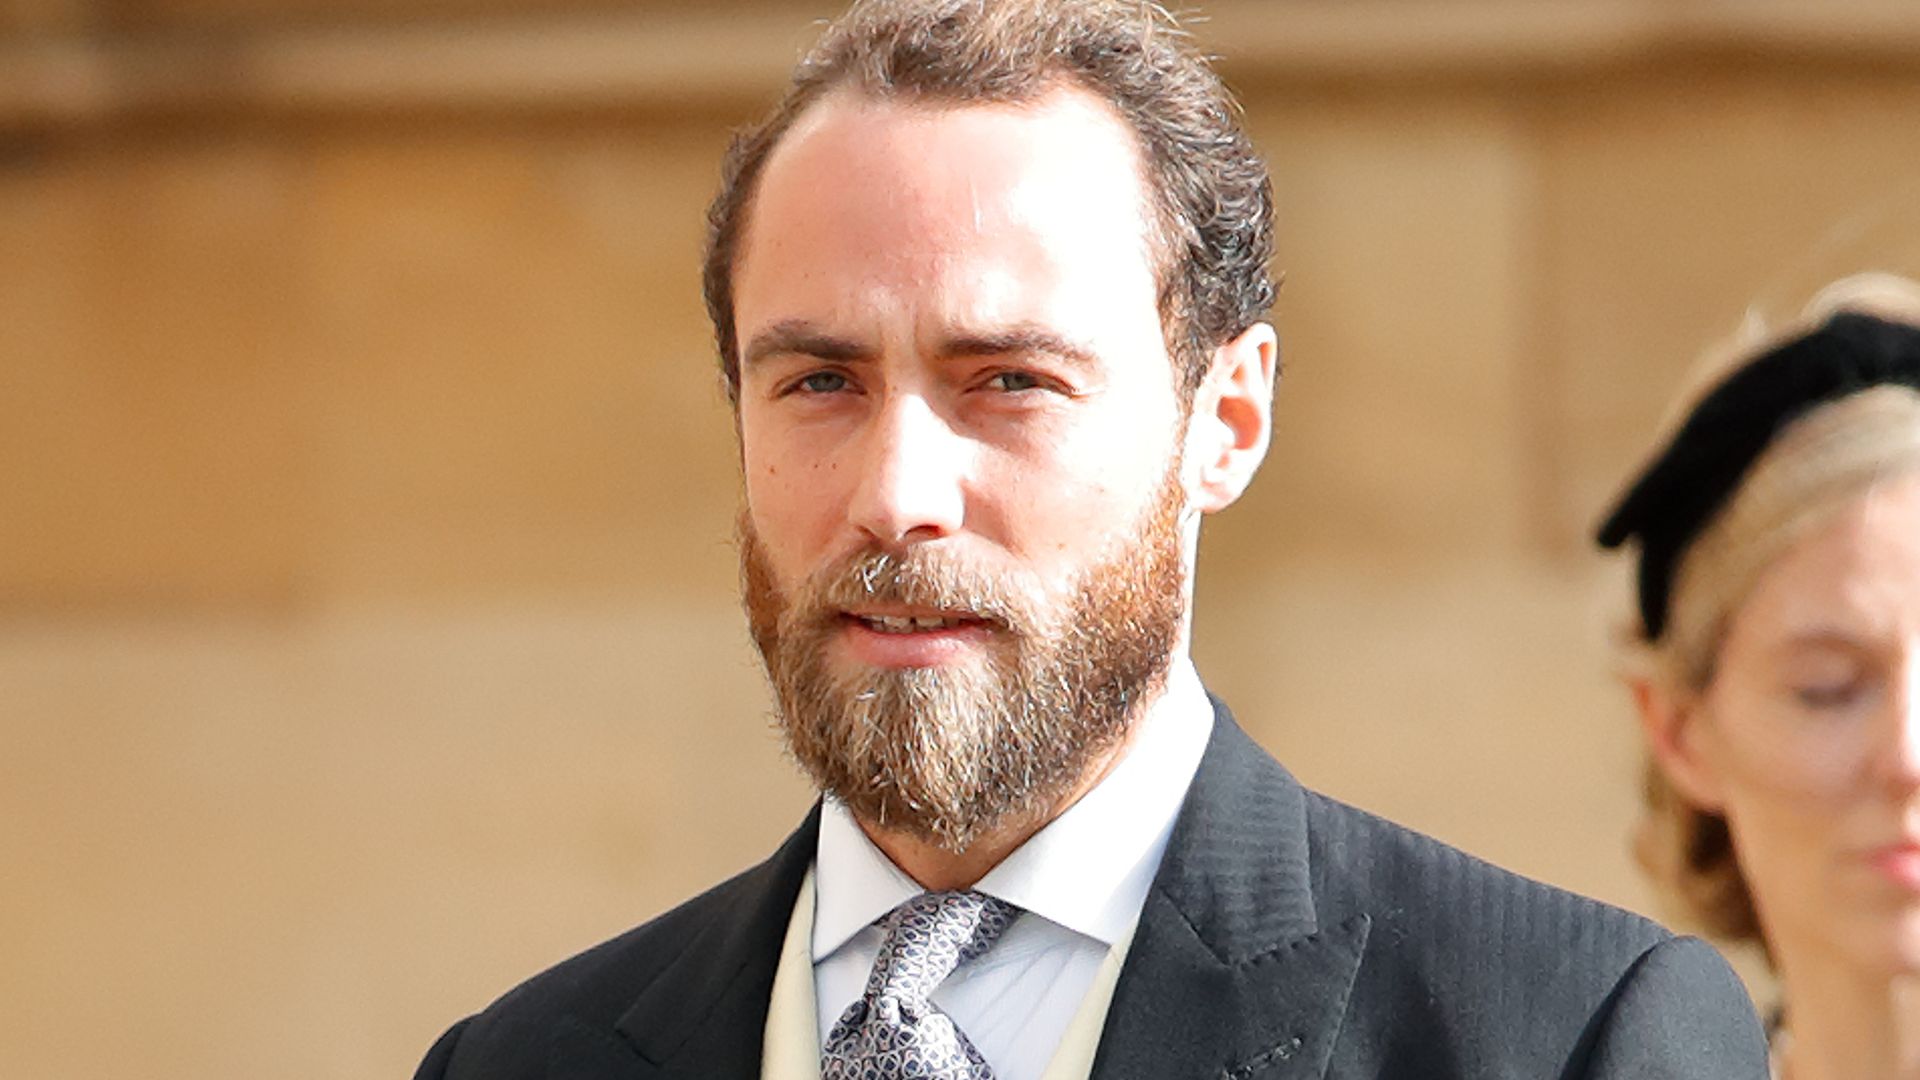 James Middleton breaks silence over feud with neighbour who put up 'malicious posters' about his parents